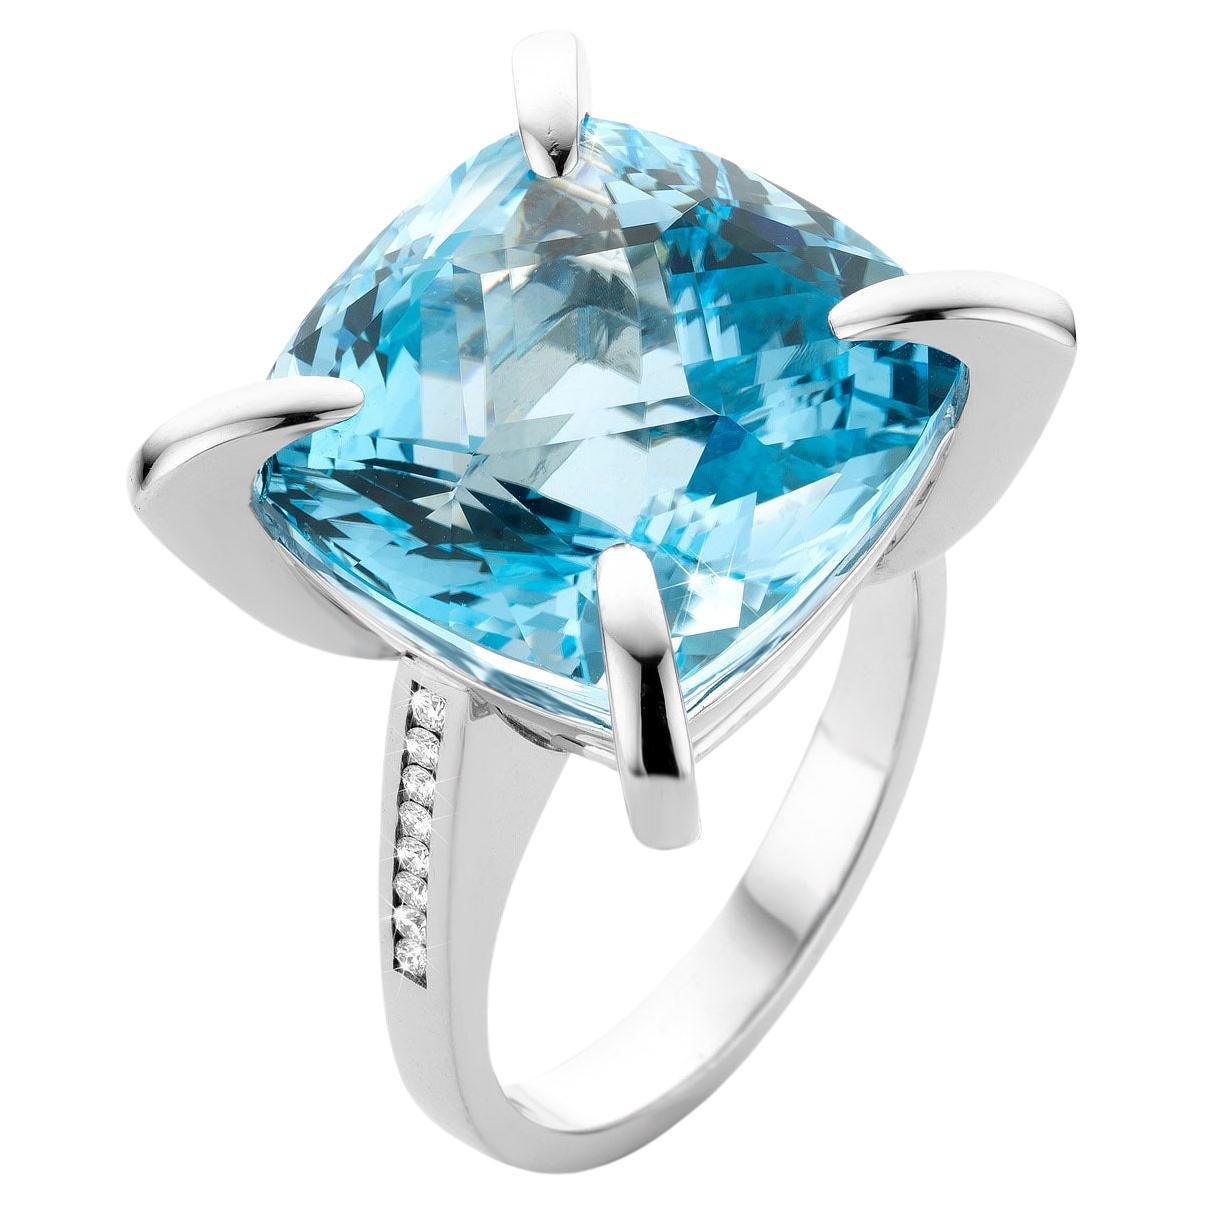 For Sale:  Fancy “Swiss Blue Statement” with Blue Topaz of 21.35 Carat and Diamonds Ring